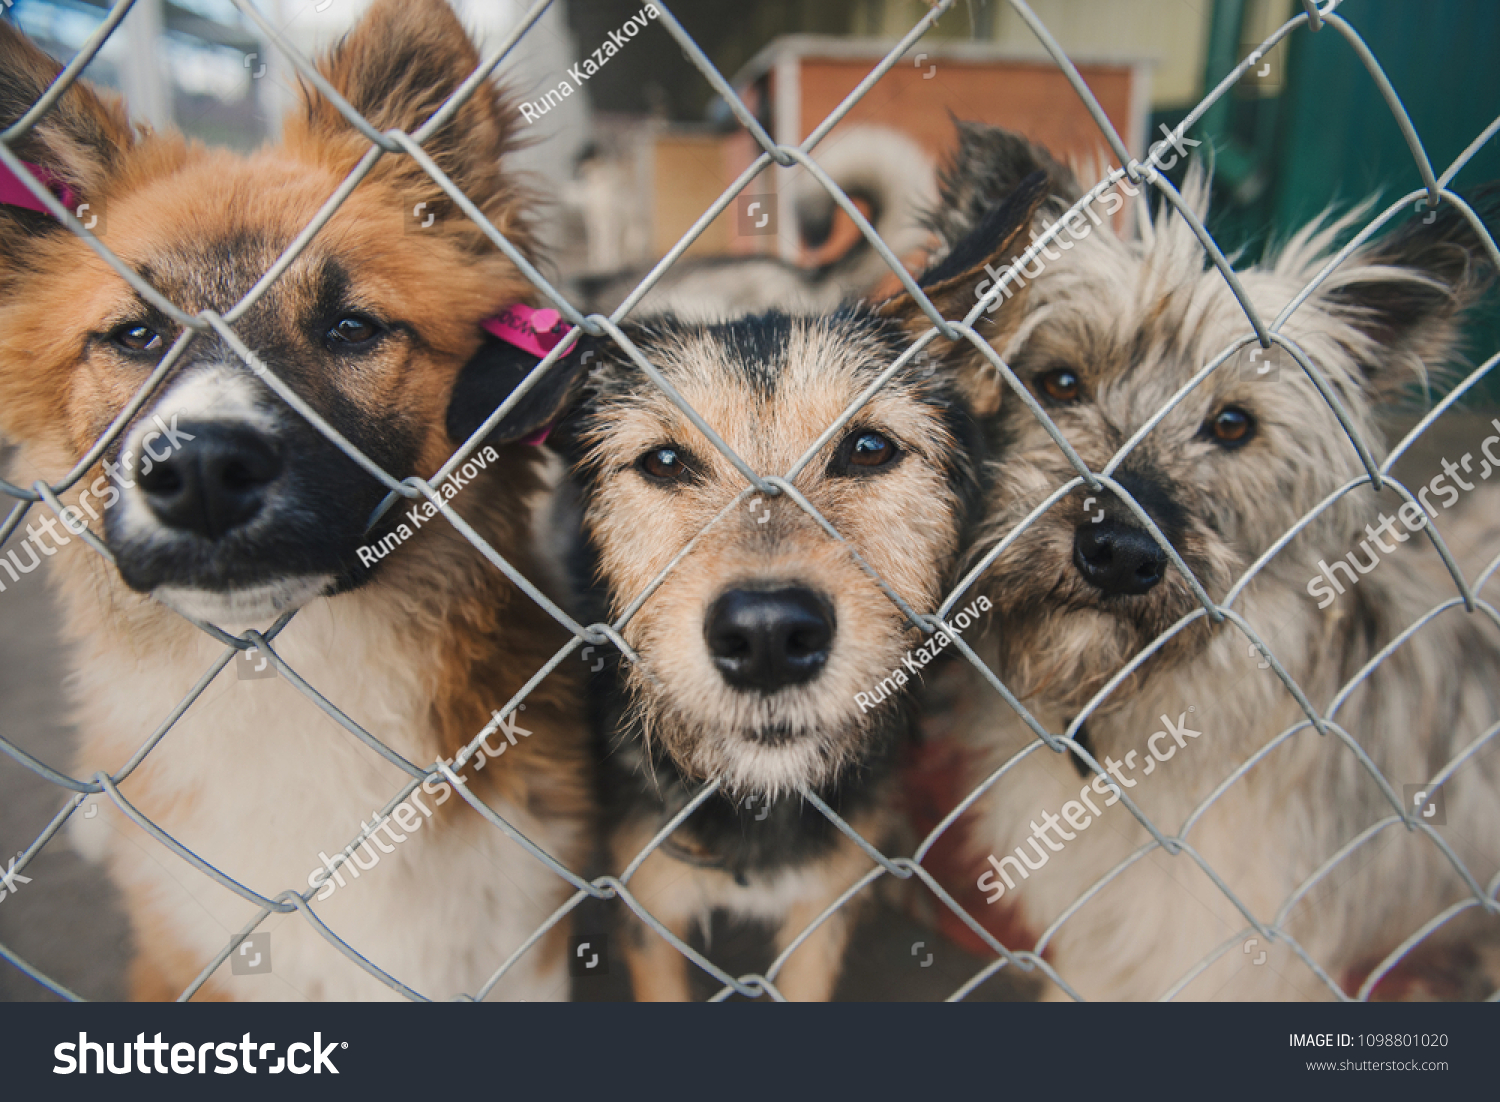 Homeless mongrel dogs is sitting on a cage in animal shelter #1098801020